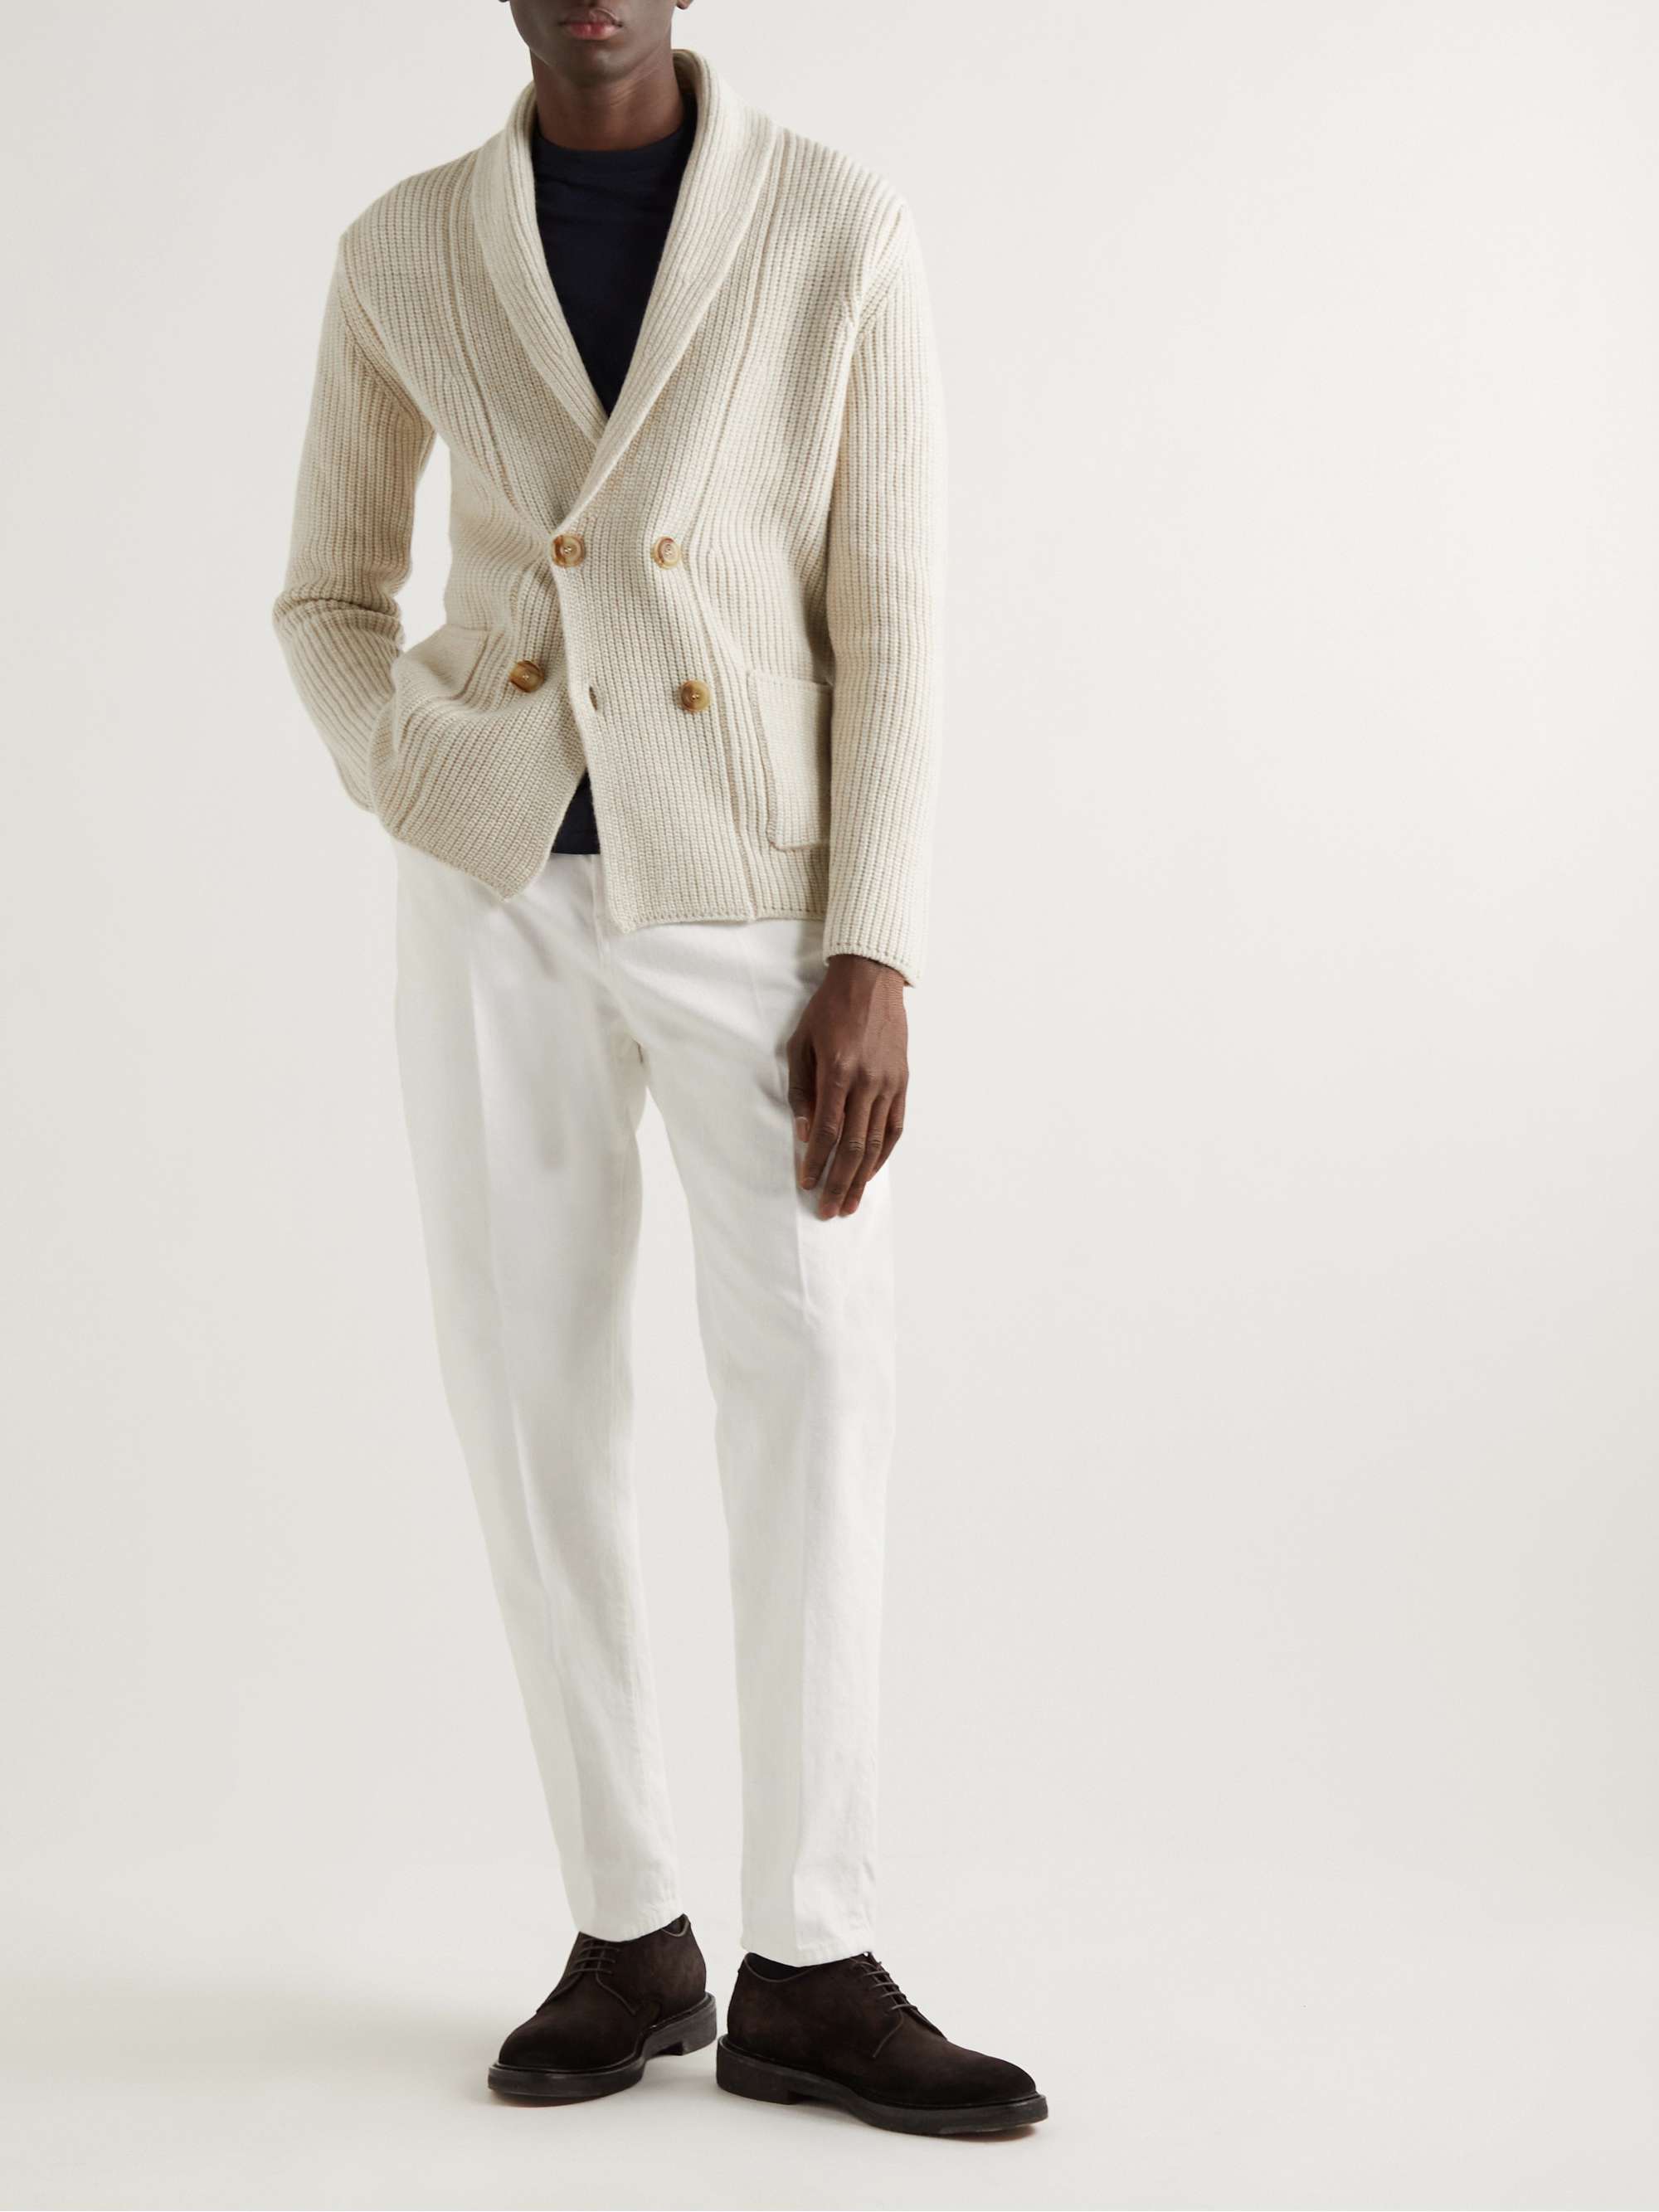 THOM SWEENEY Slim-Fit Shawl-Collar Double-Breasted Merino Wool and Cashmere-Blend Cardigan